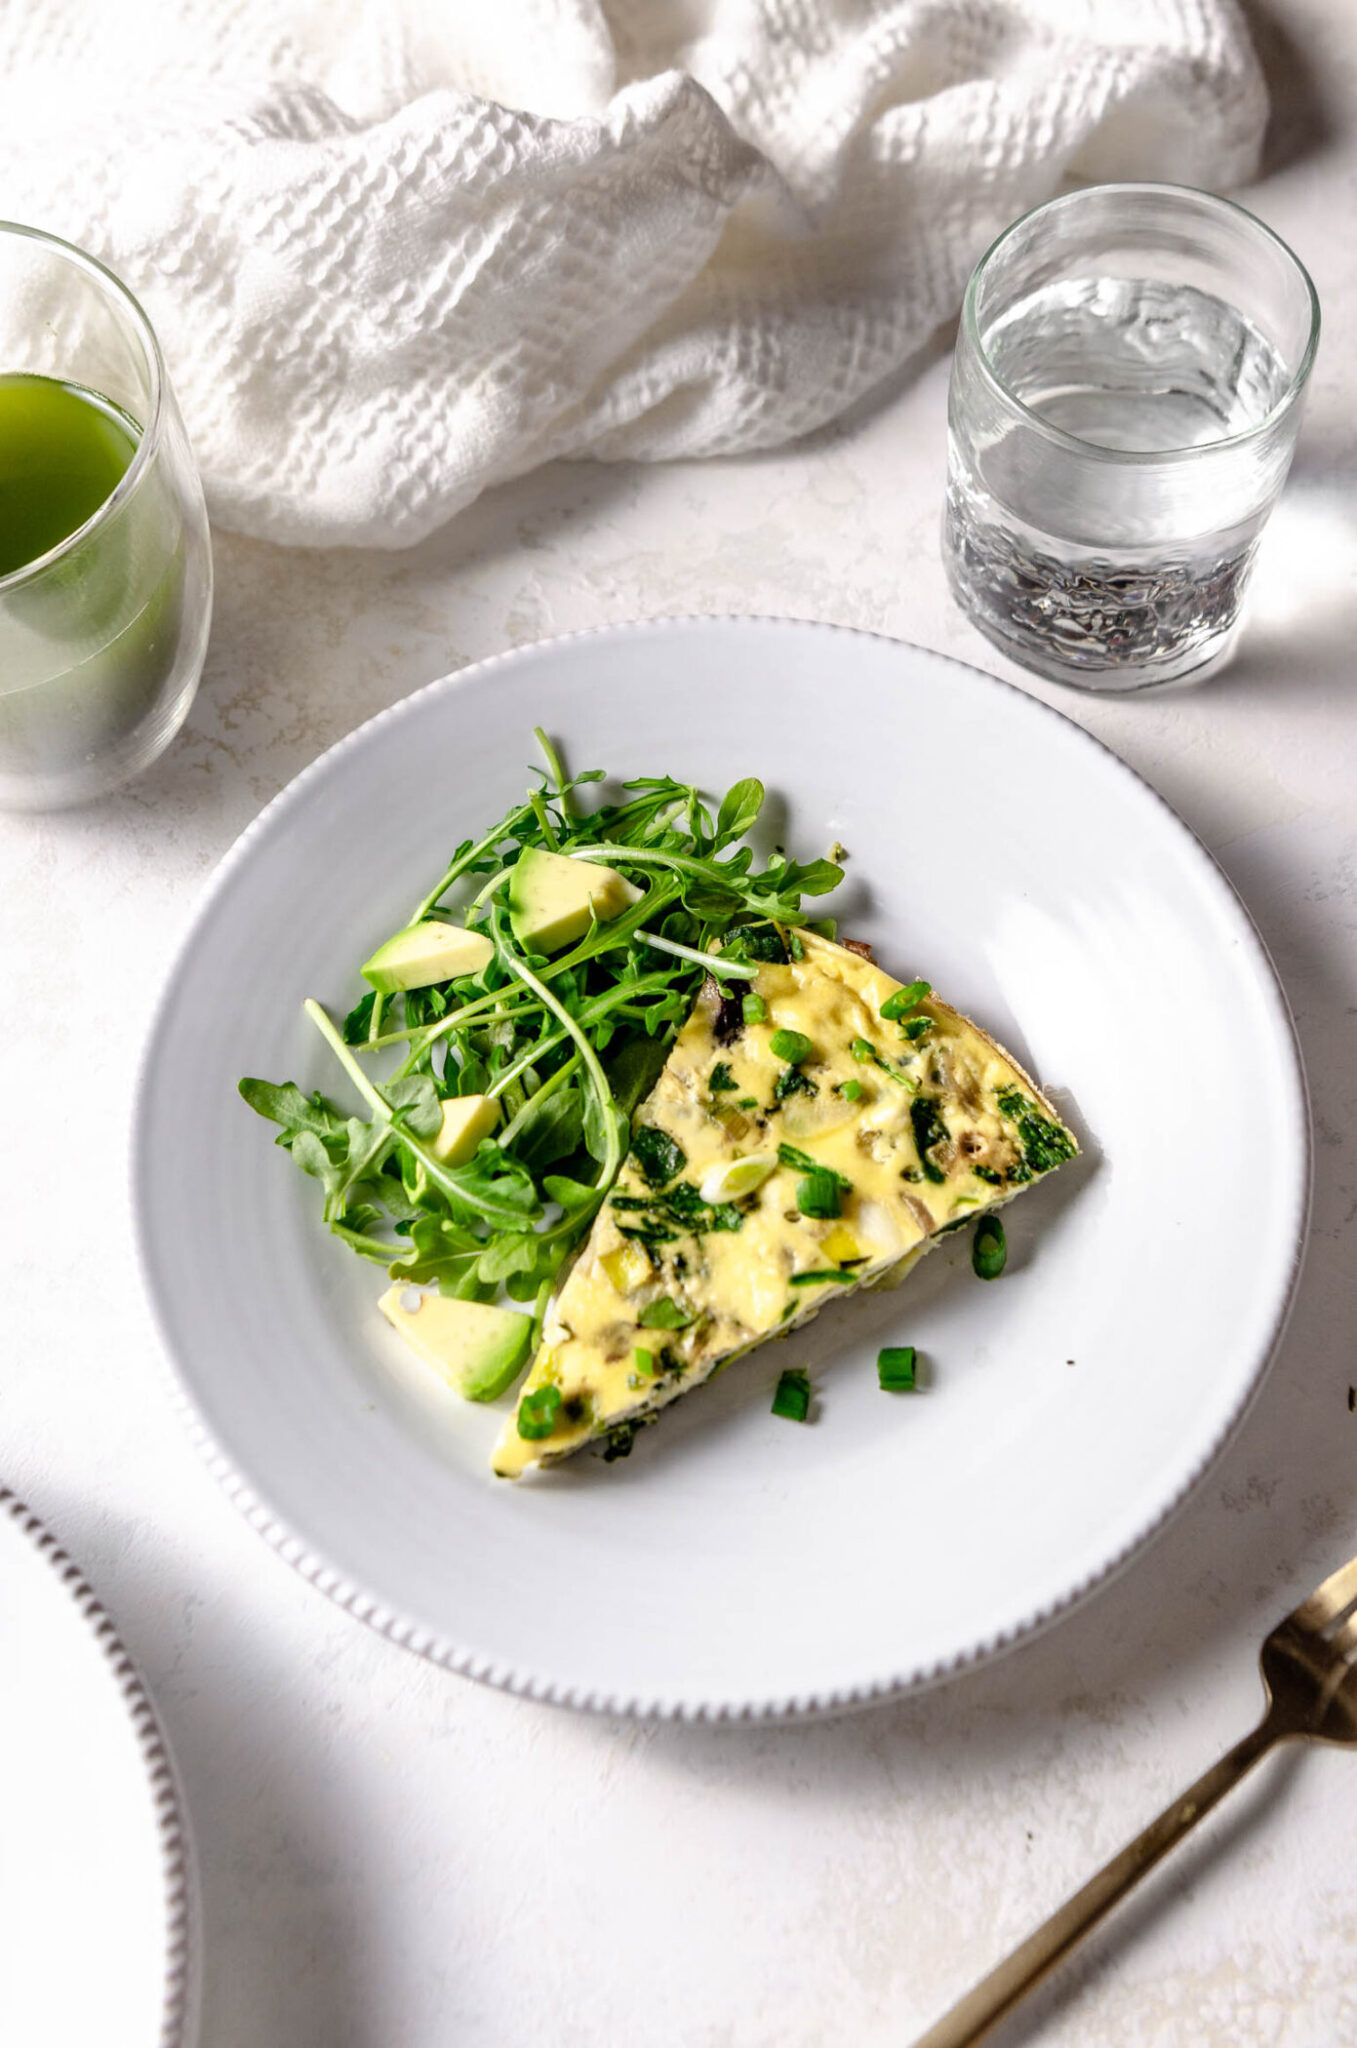 Slice of a green vegetable frittata served with avocado slides and arugula.